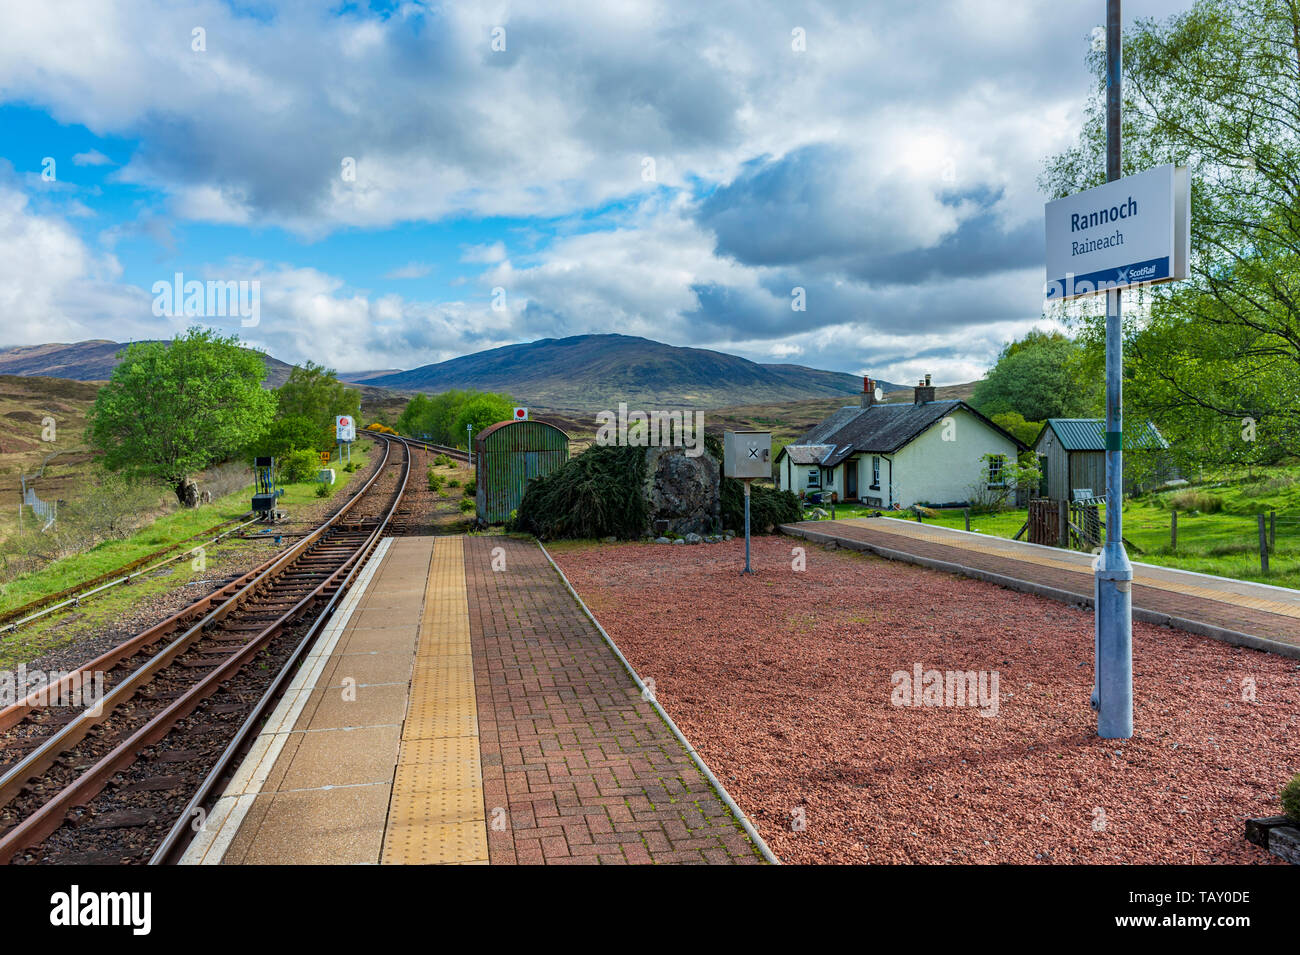 Rannoch Station, Perth and Kinross, Scotland, United Kingdom - One of the most remote railway stations in the British Isles on the edge of Rannoch Moor, Scotland Stock Photo